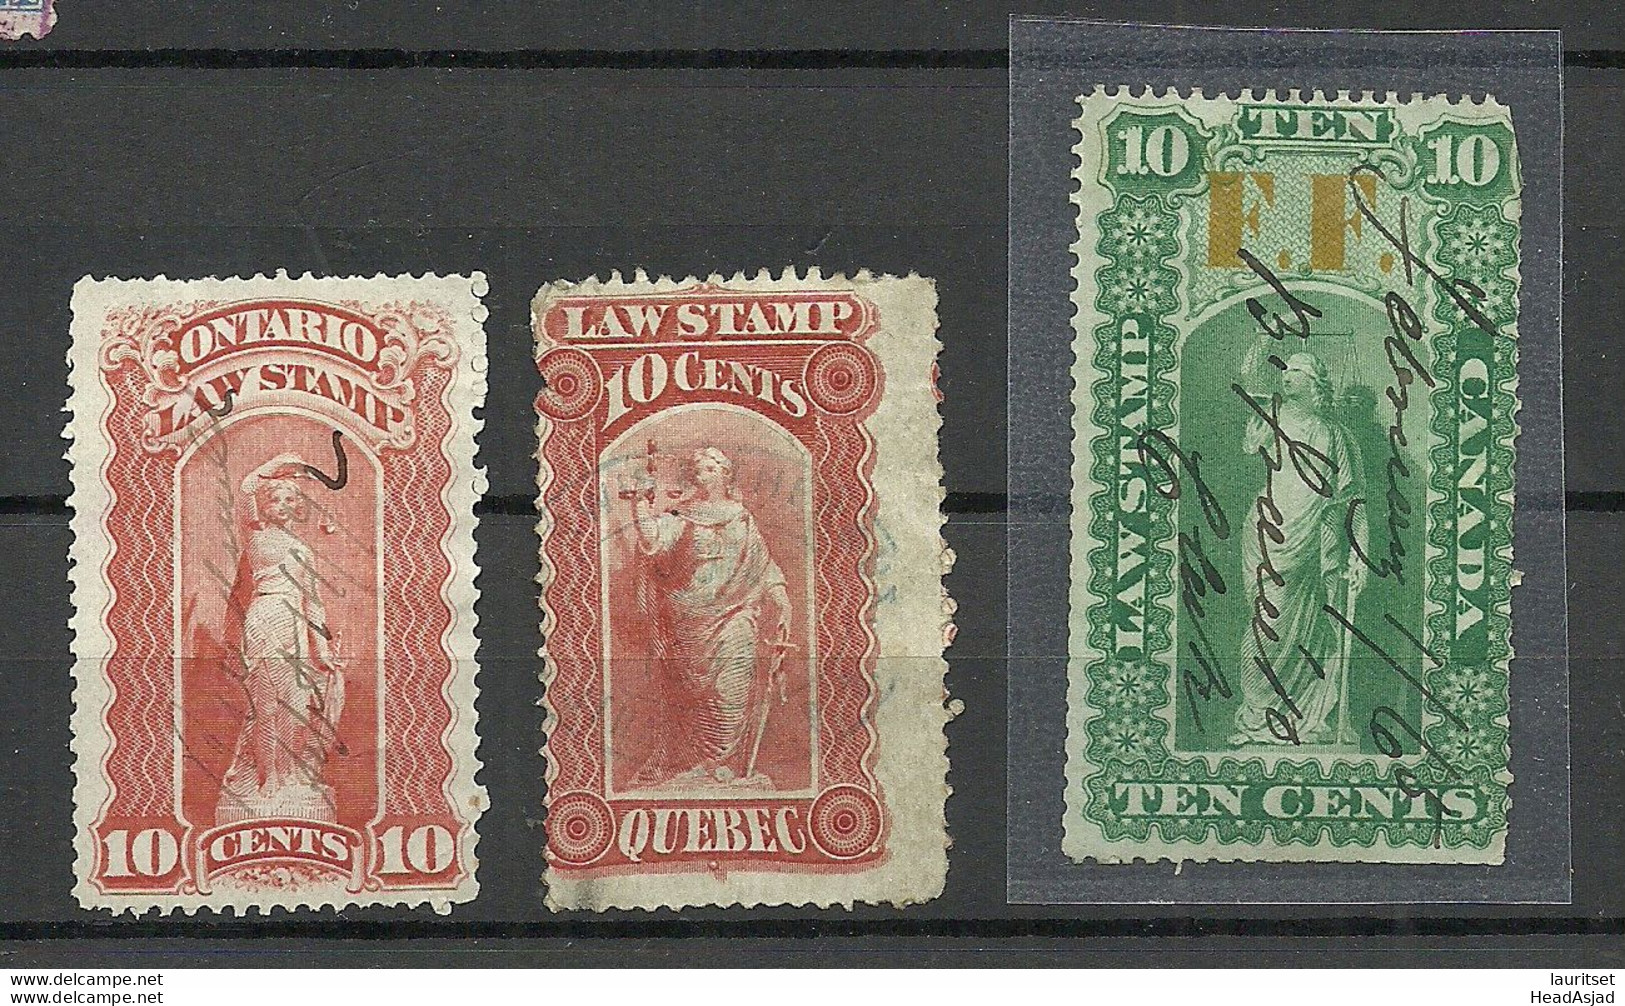 CANADA Taxe Tax Revenue Law Stamps O - Fiscaux